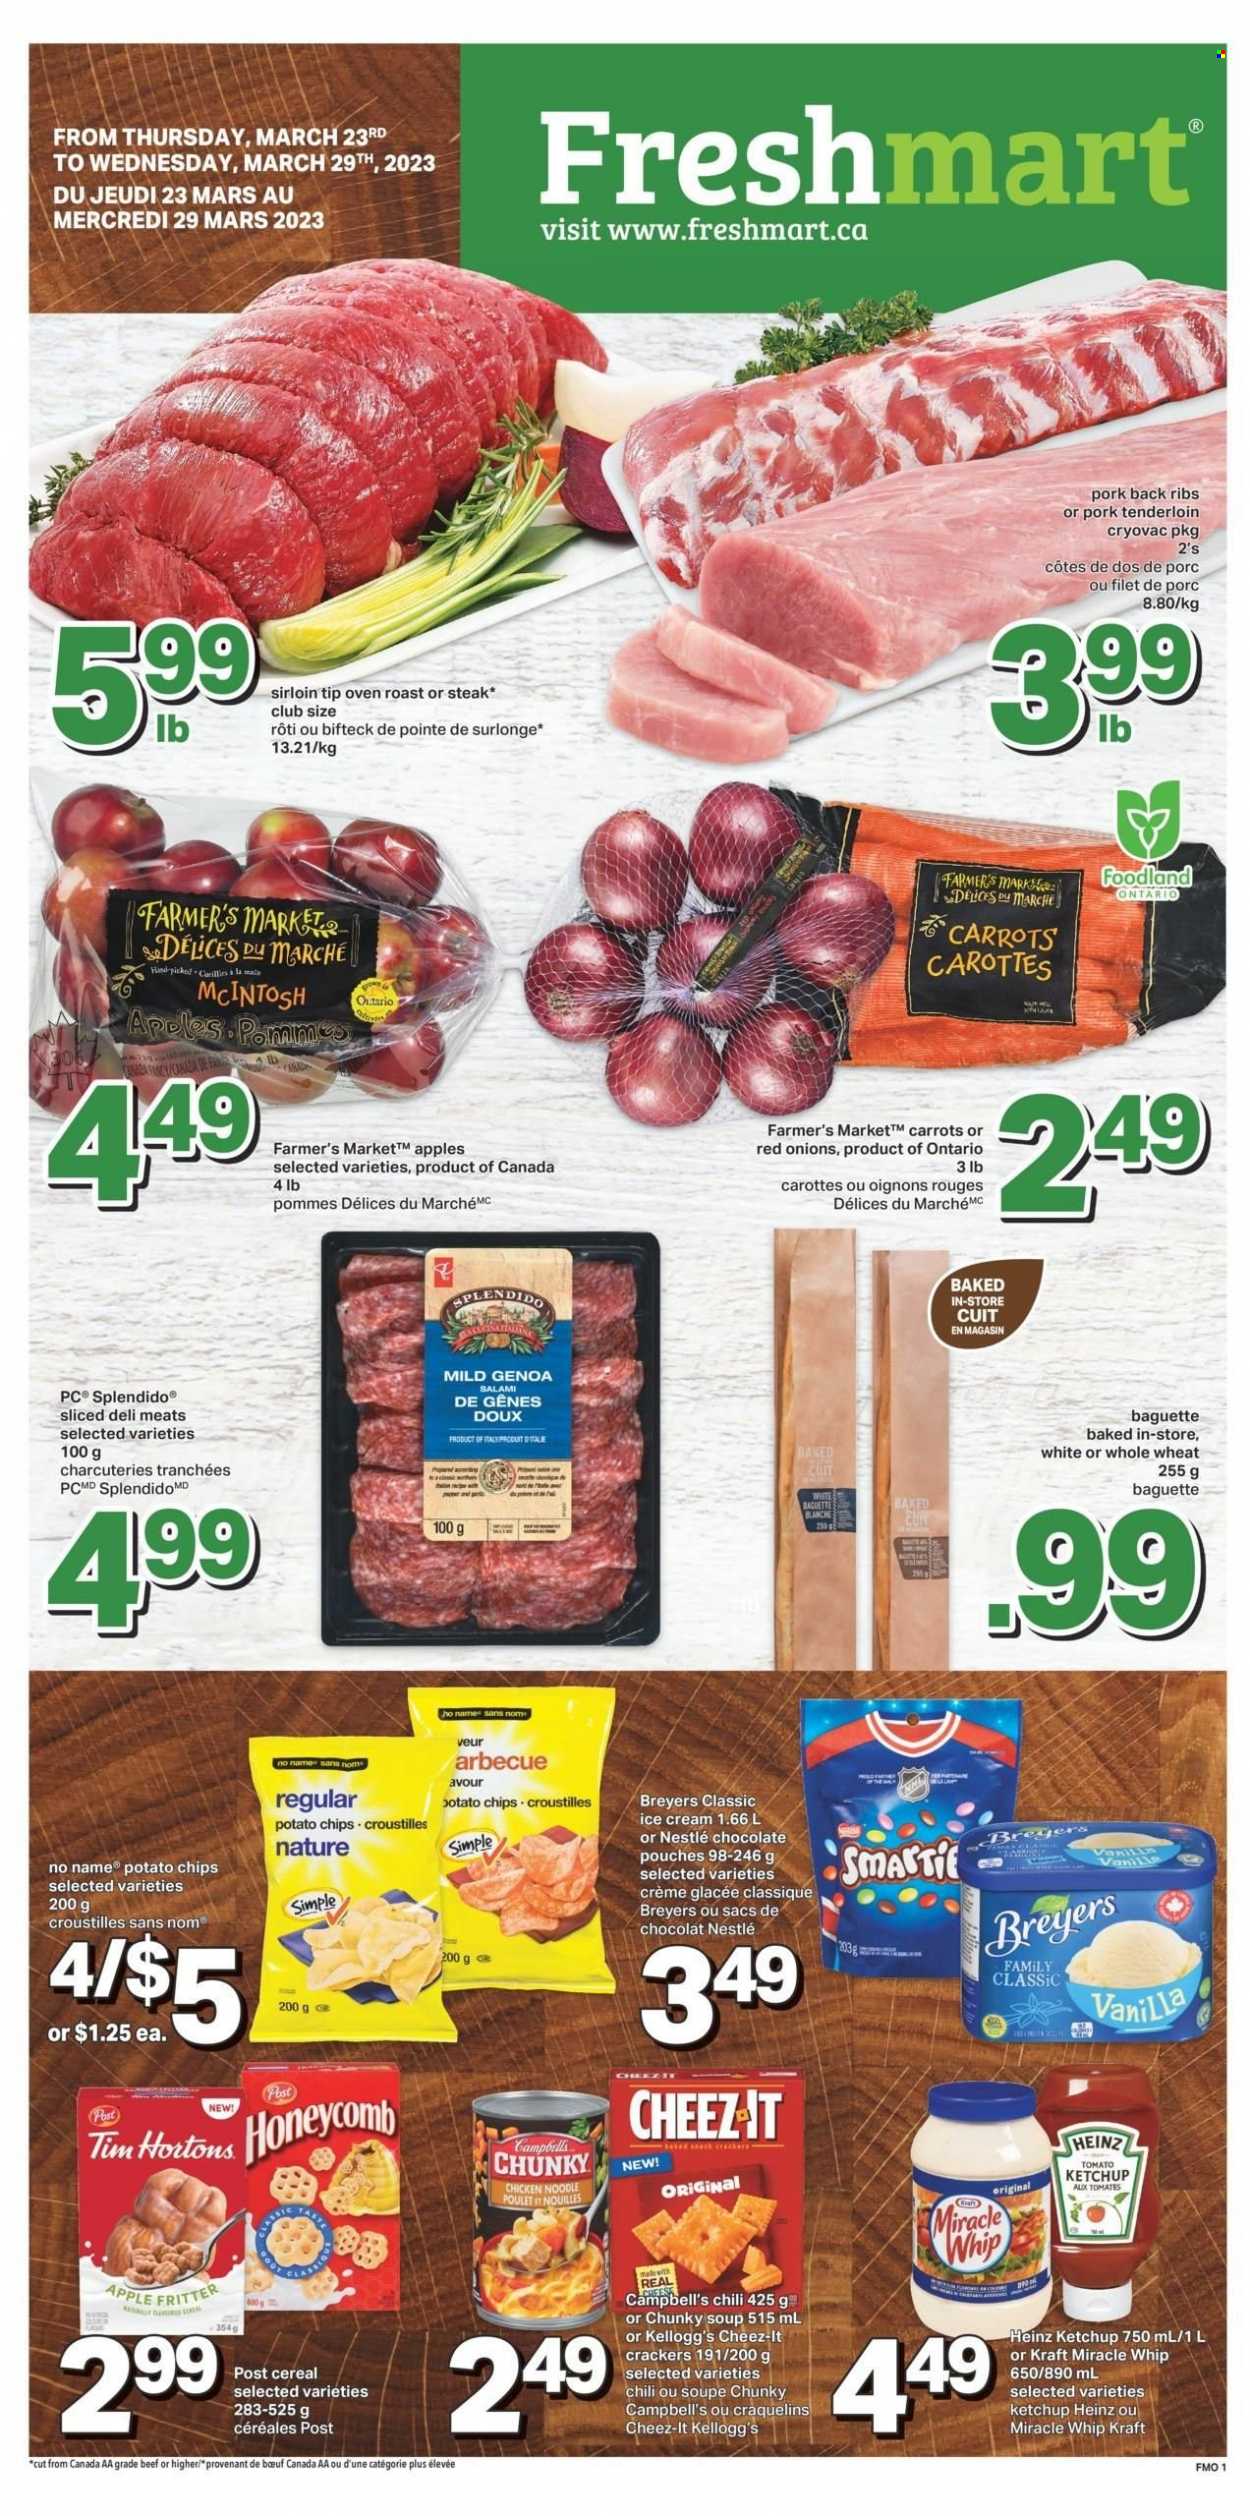 thumbnail - Freshmart Flyer - March 23, 2023 - March 29, 2023 - Sales products - carrots, red onions, apples, No Name, Campbell's, soup, noodles, Kraft®, roast, salami, Miracle Whip, ice cream, snack, Mars, crackers, Kellogg's, potato chips, chips, Cheez-It, cereals, steak, ribs, pork meat, pork ribs, pork tenderloin, pork back ribs, baguette, Nestlé, Heinz, ketchup. Page 1.